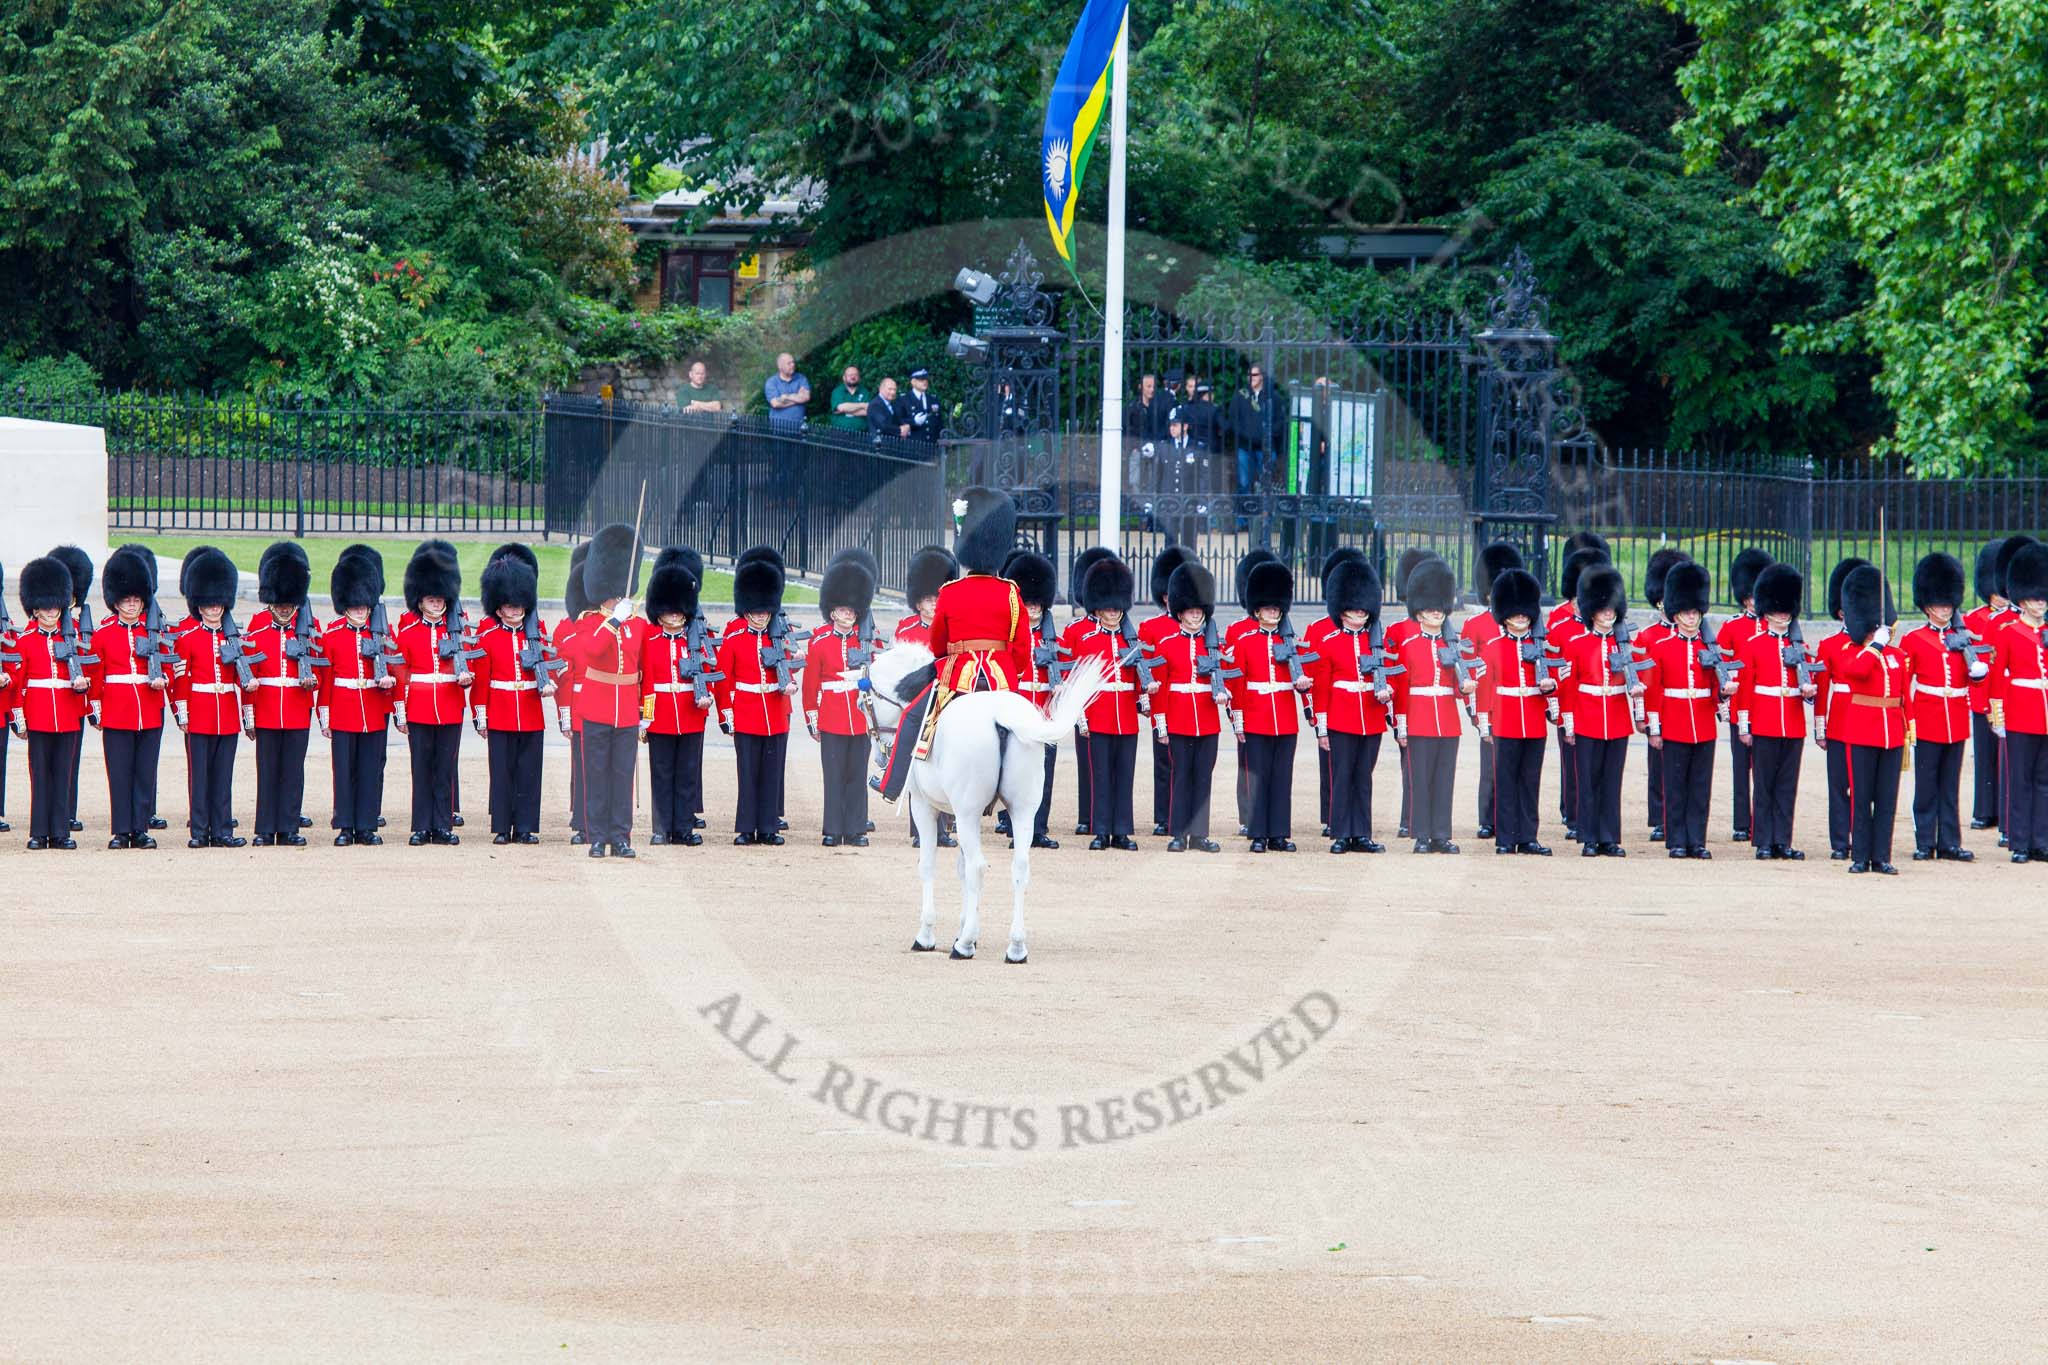 Trooping the Colour 2013: The Field Officer addresses the Guards. Image #167, 15 June 2013 10:42 Horse Guards Parade, London, UK